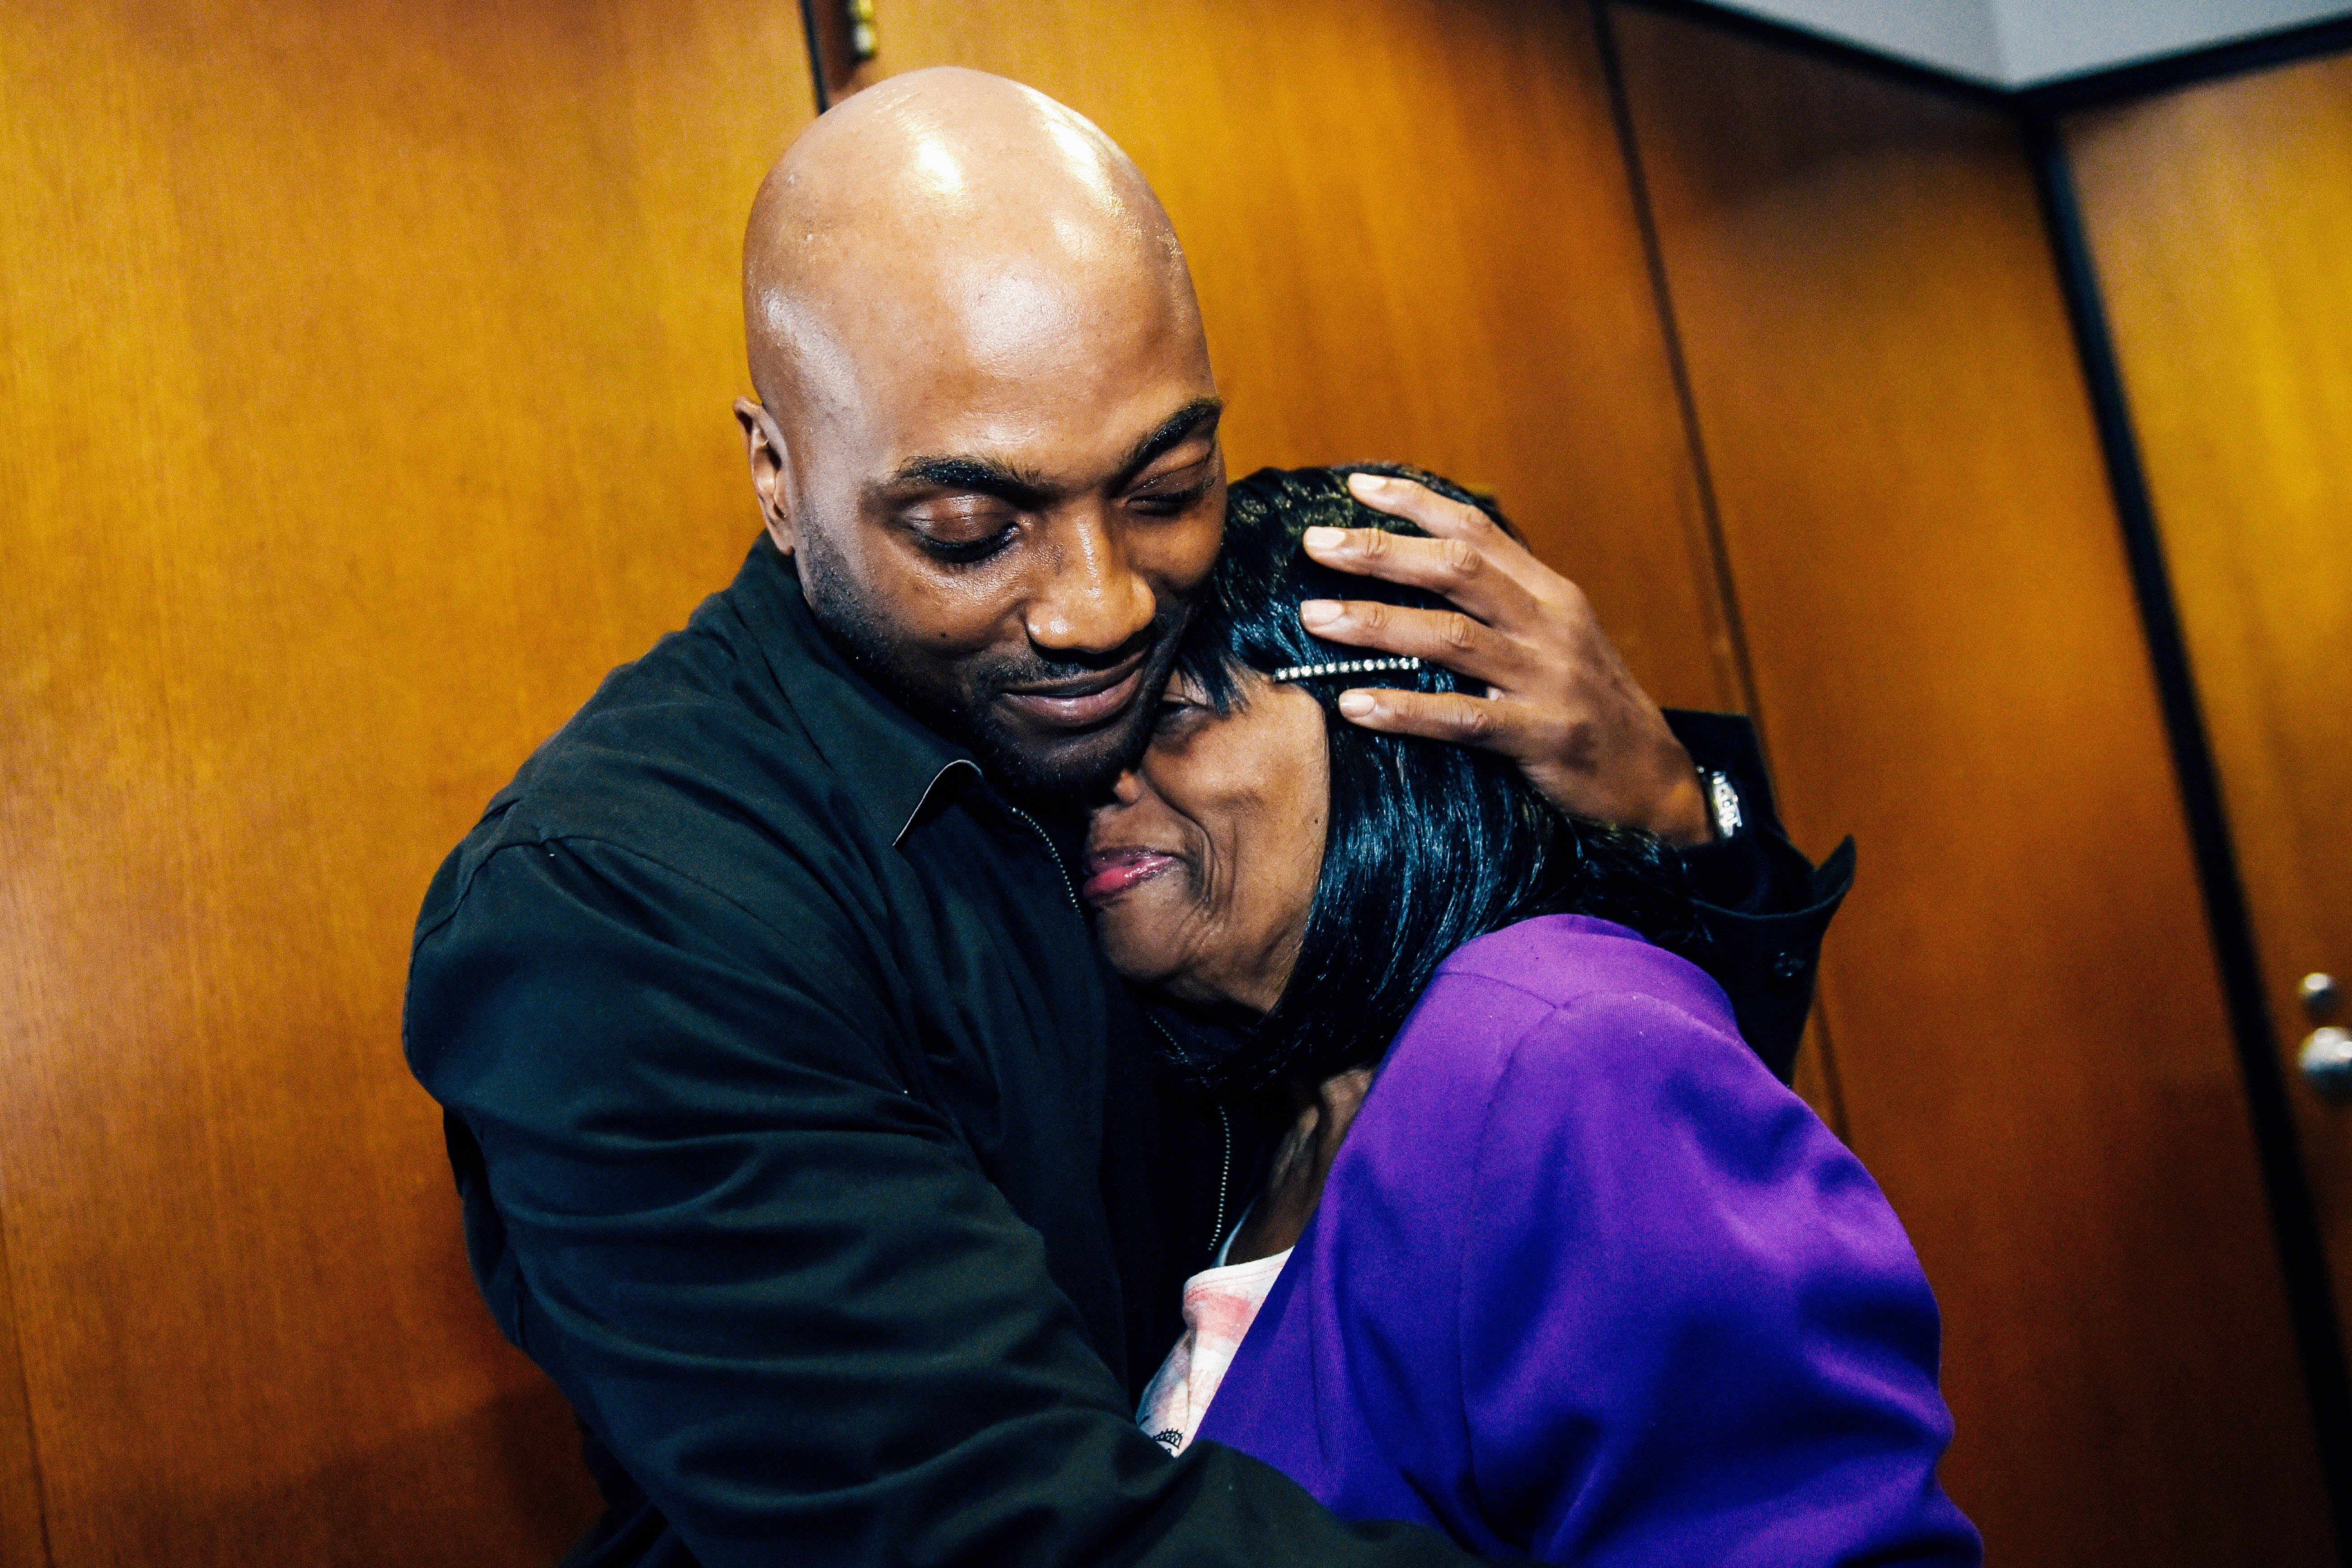 Lamarr Monson, hugs his mother, Delores Monson, after all charges were dismissed against him in the 1996 slaying of 12-year-old Detroiter Christina Brown.